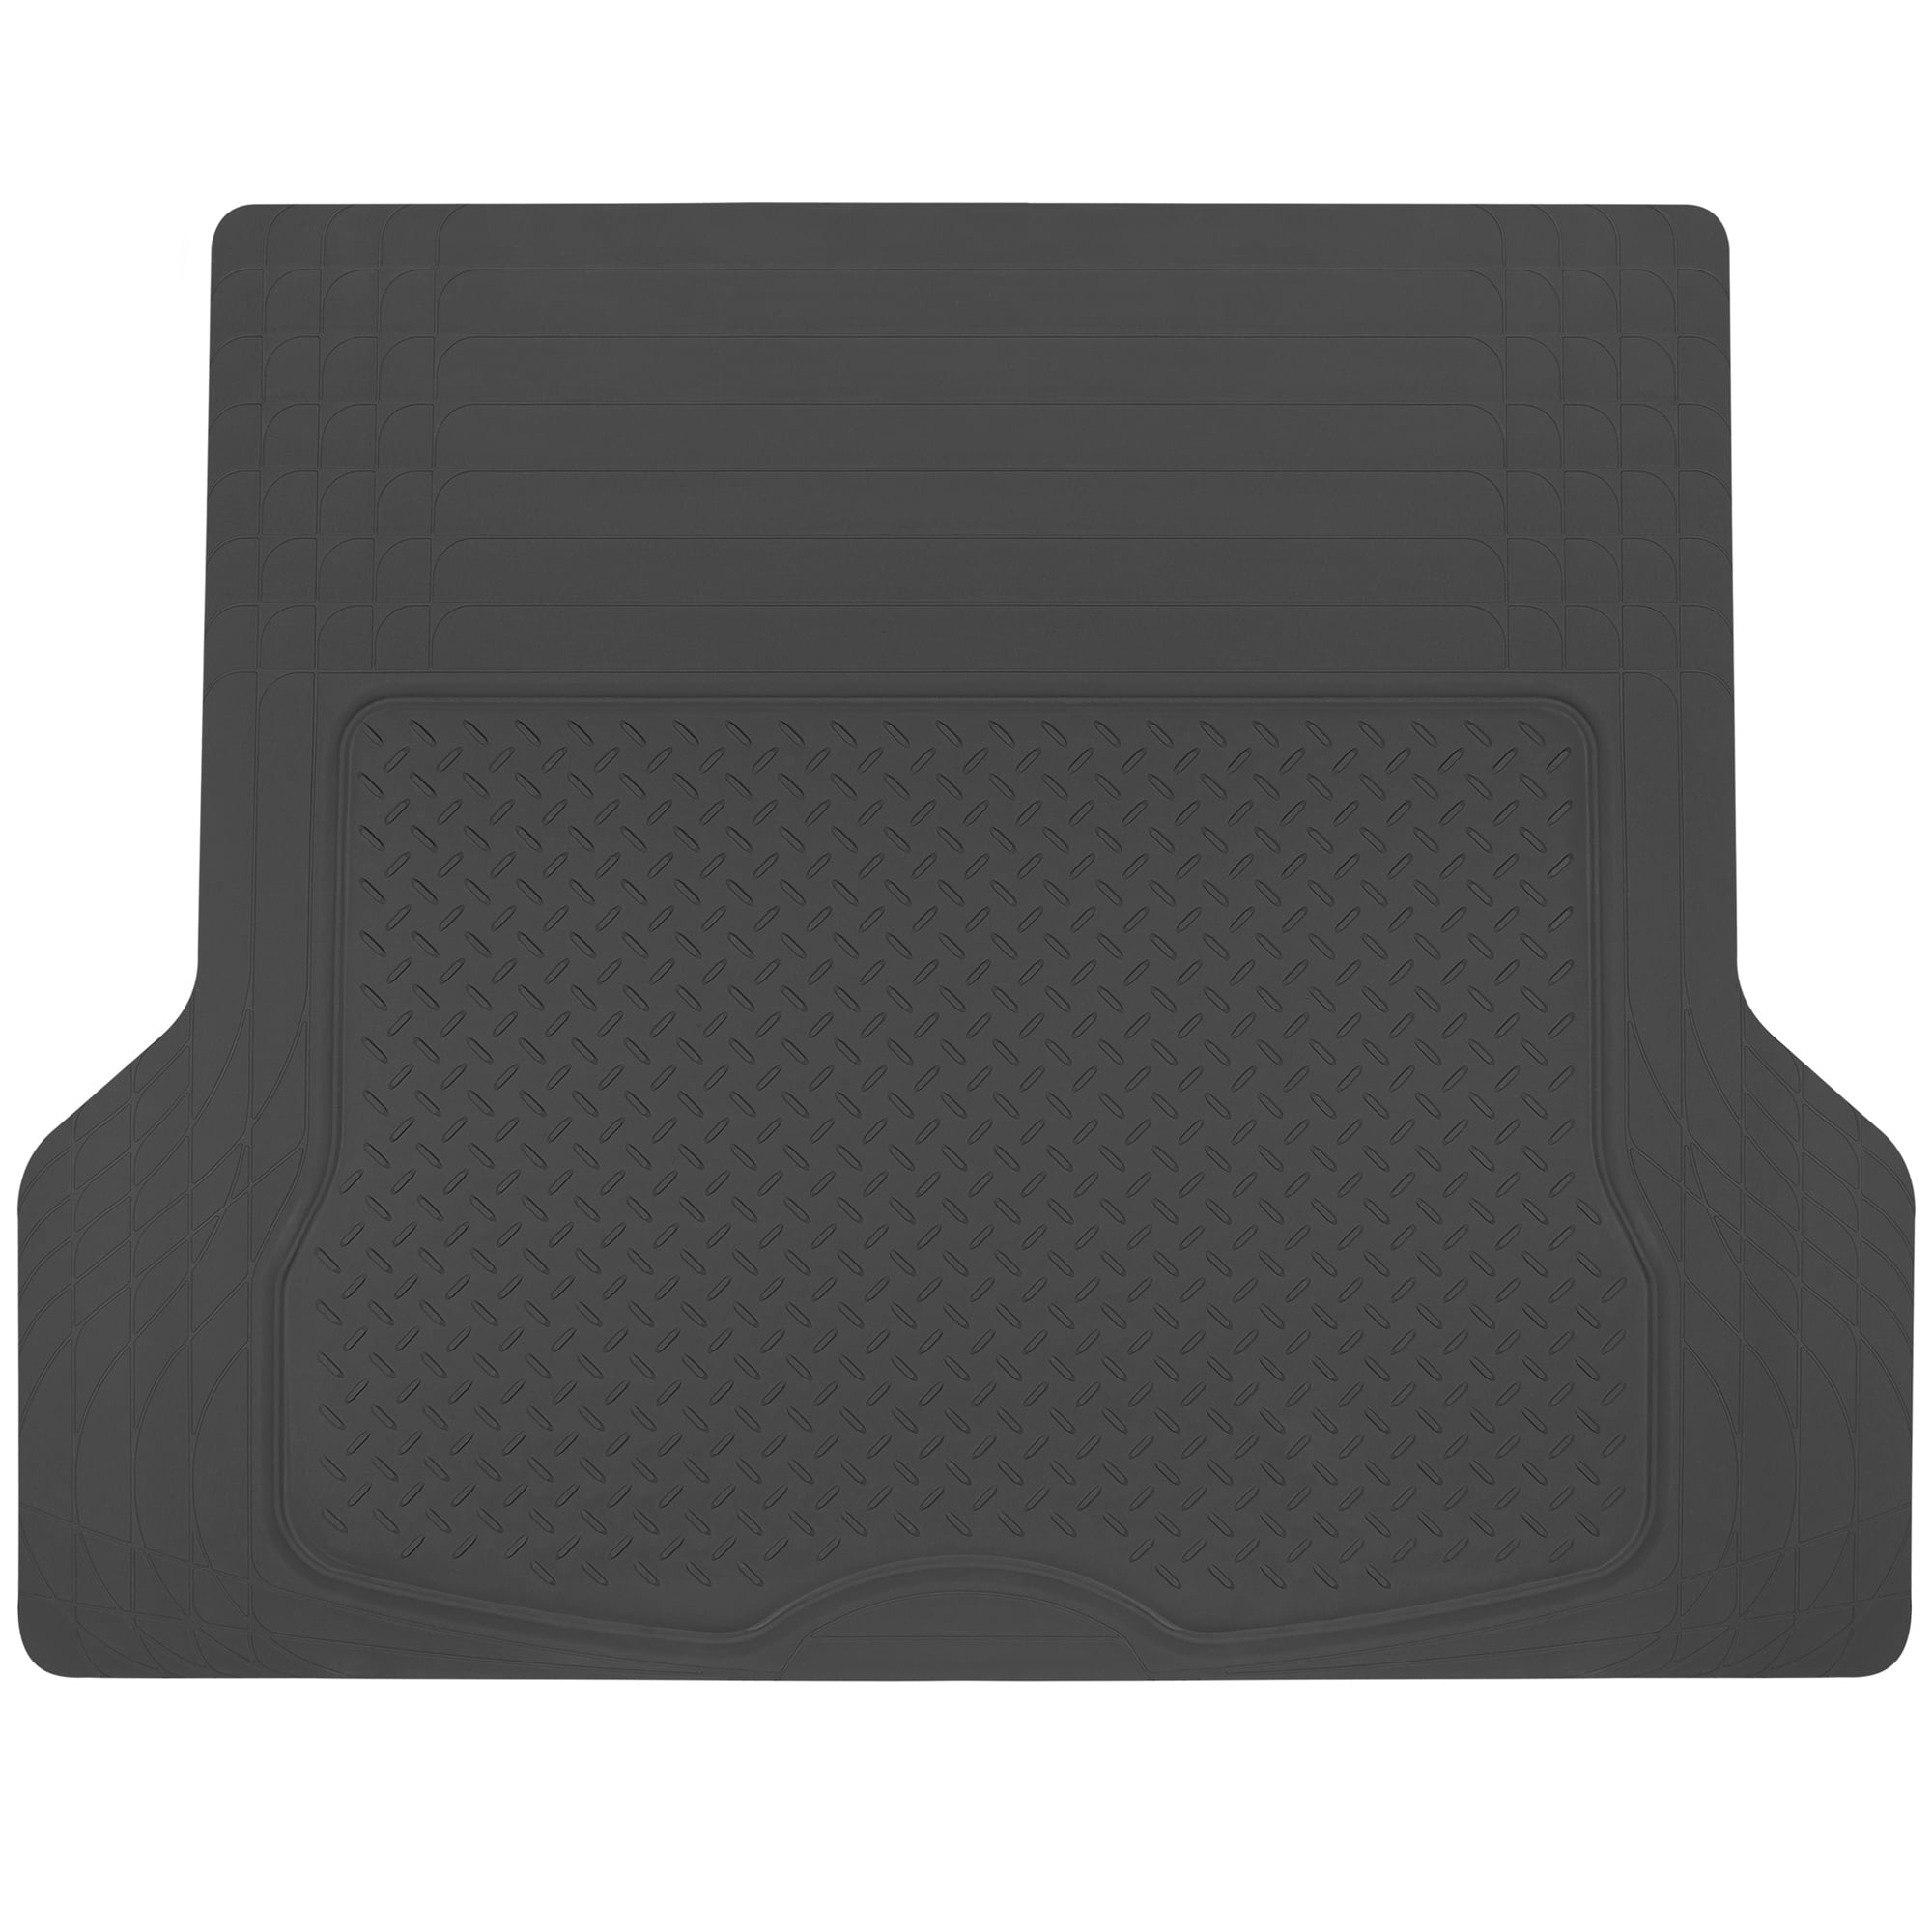 Dash Mat Gray Trunk Cargo Liner Mat All Weather Protection for Car SUV Van W